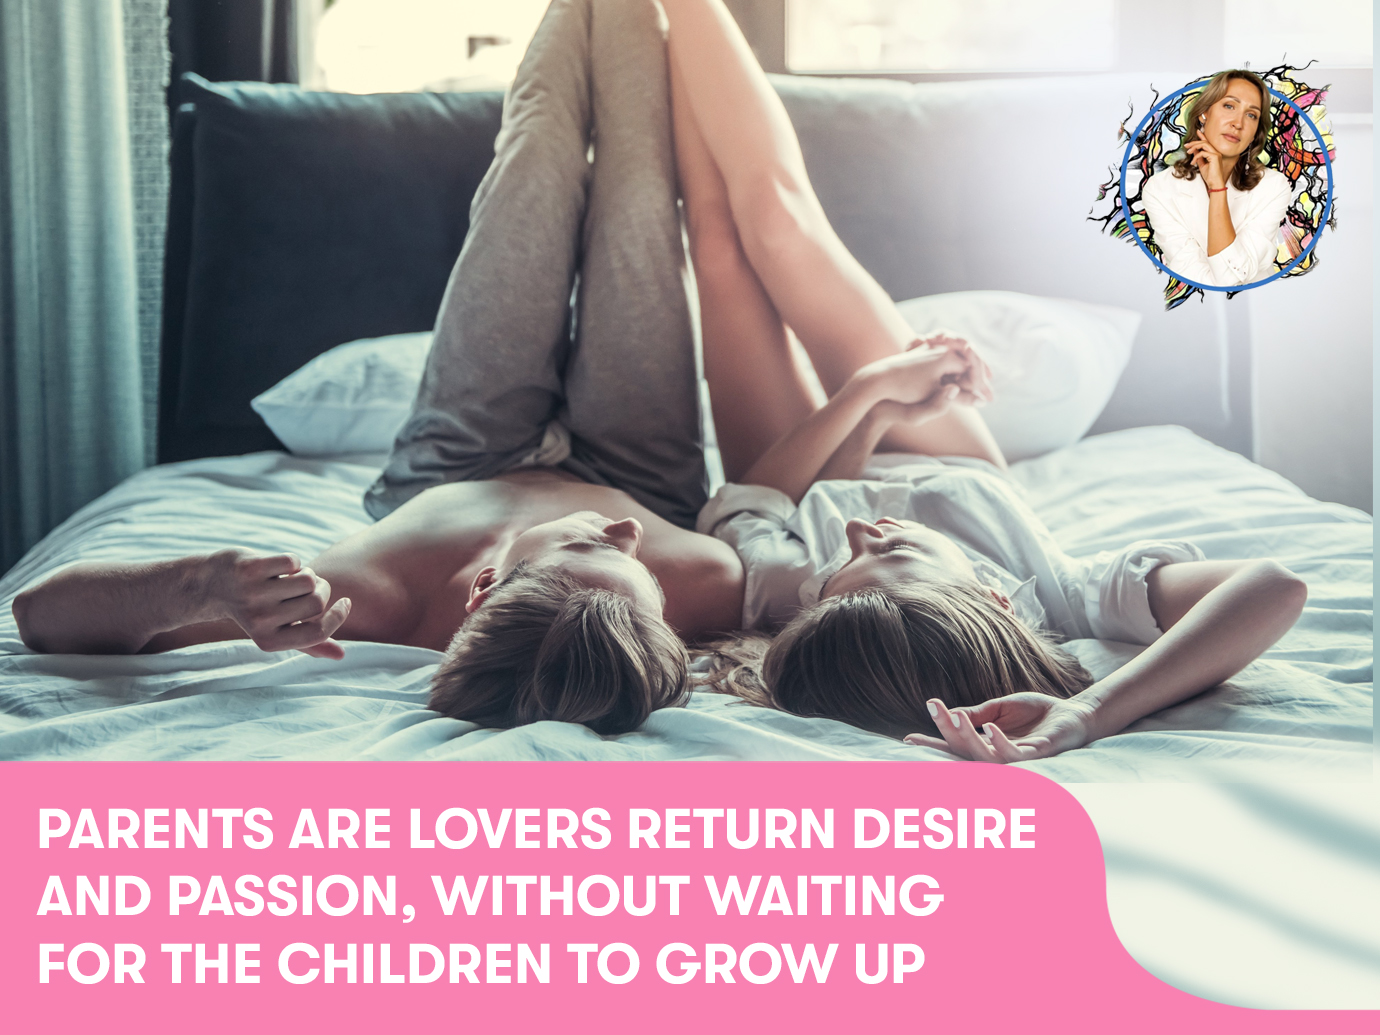 PARENTS ARE LOVERS RETURN DESIRE AND PASSION, WITHOUT WAITING FOR THE CHILDREN TO GROW UP